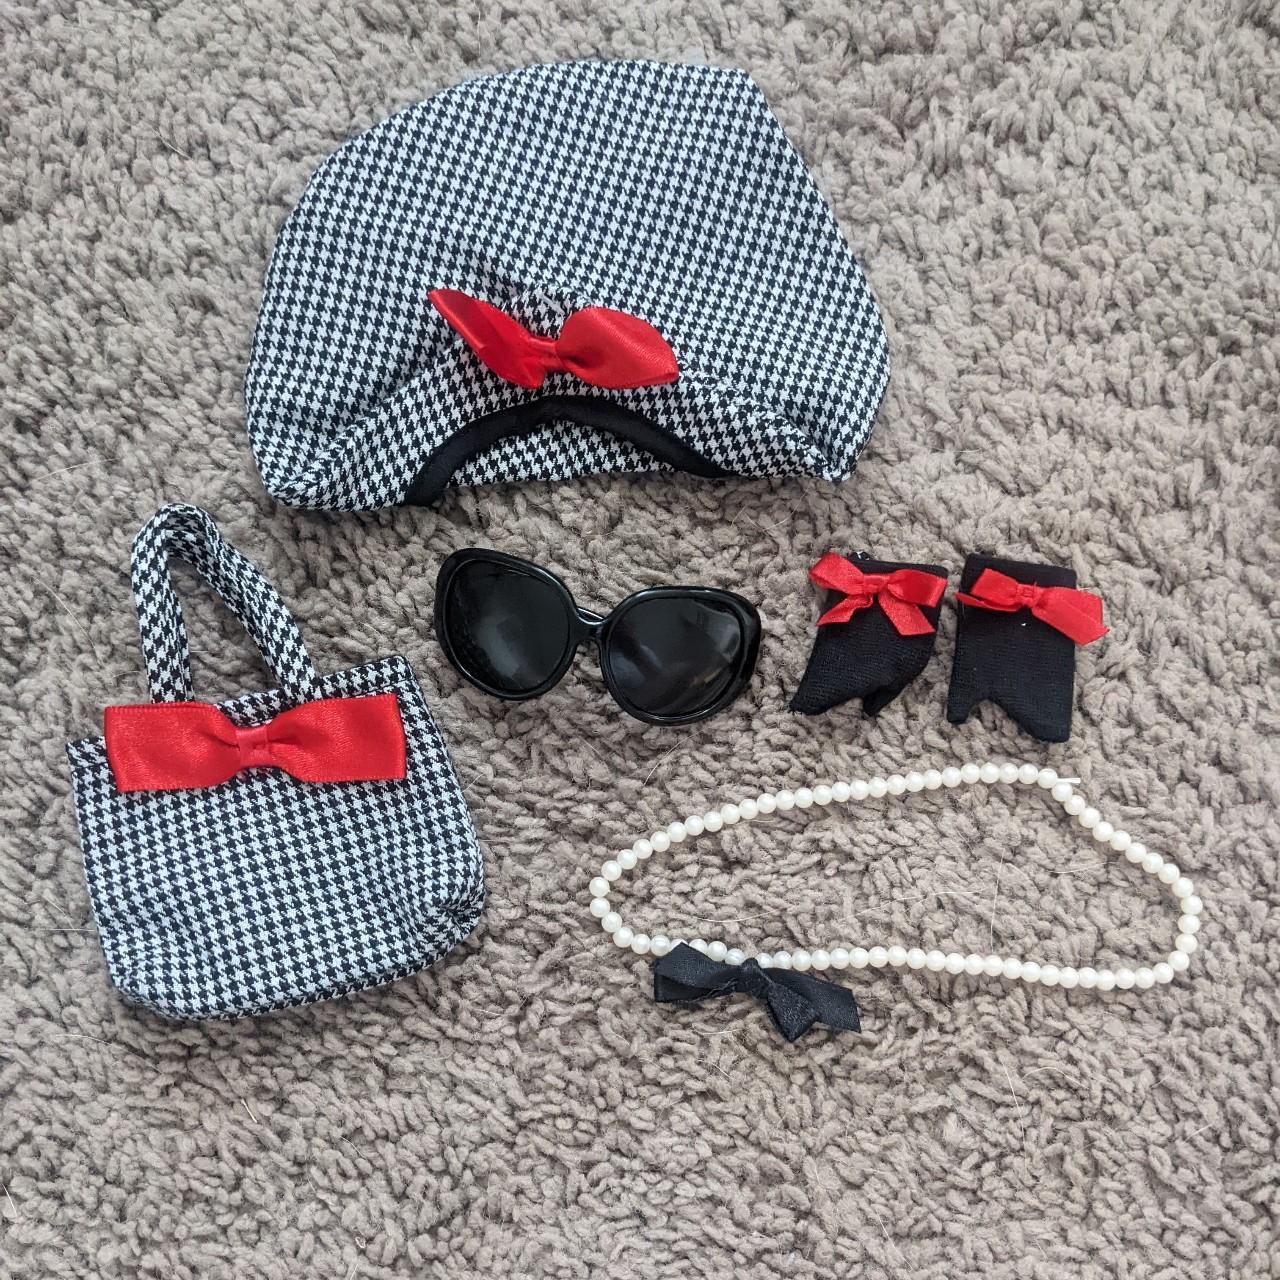 American Eagle Outfitters, Accessories